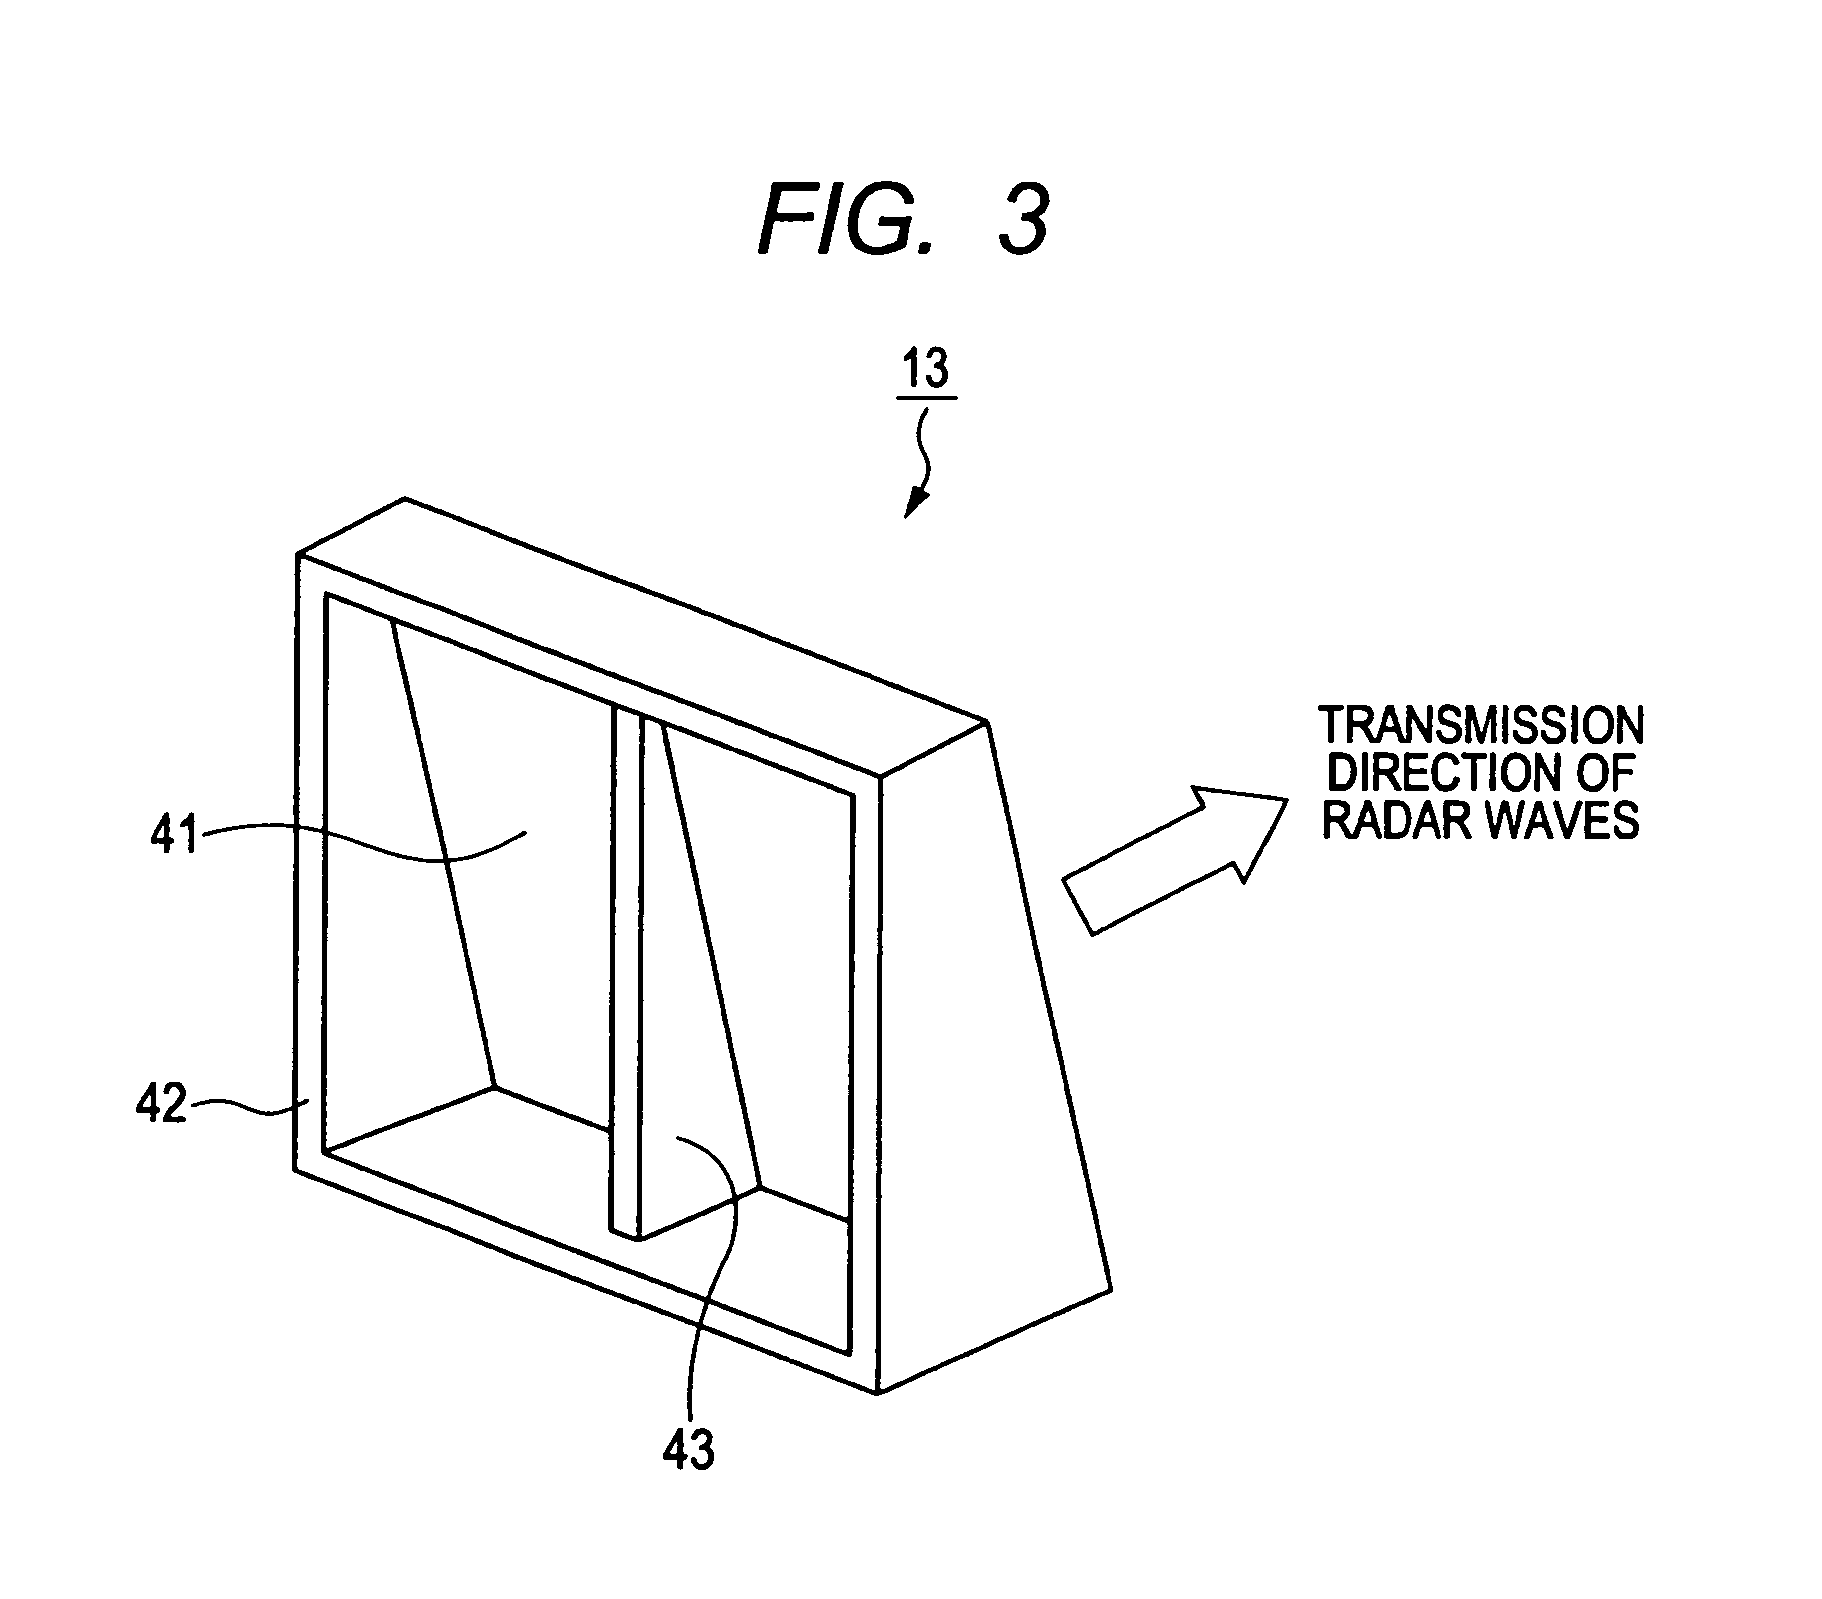 Radome incorporating partition wall for enhancing isolation between transmitted and received radar waves of radar apparatus